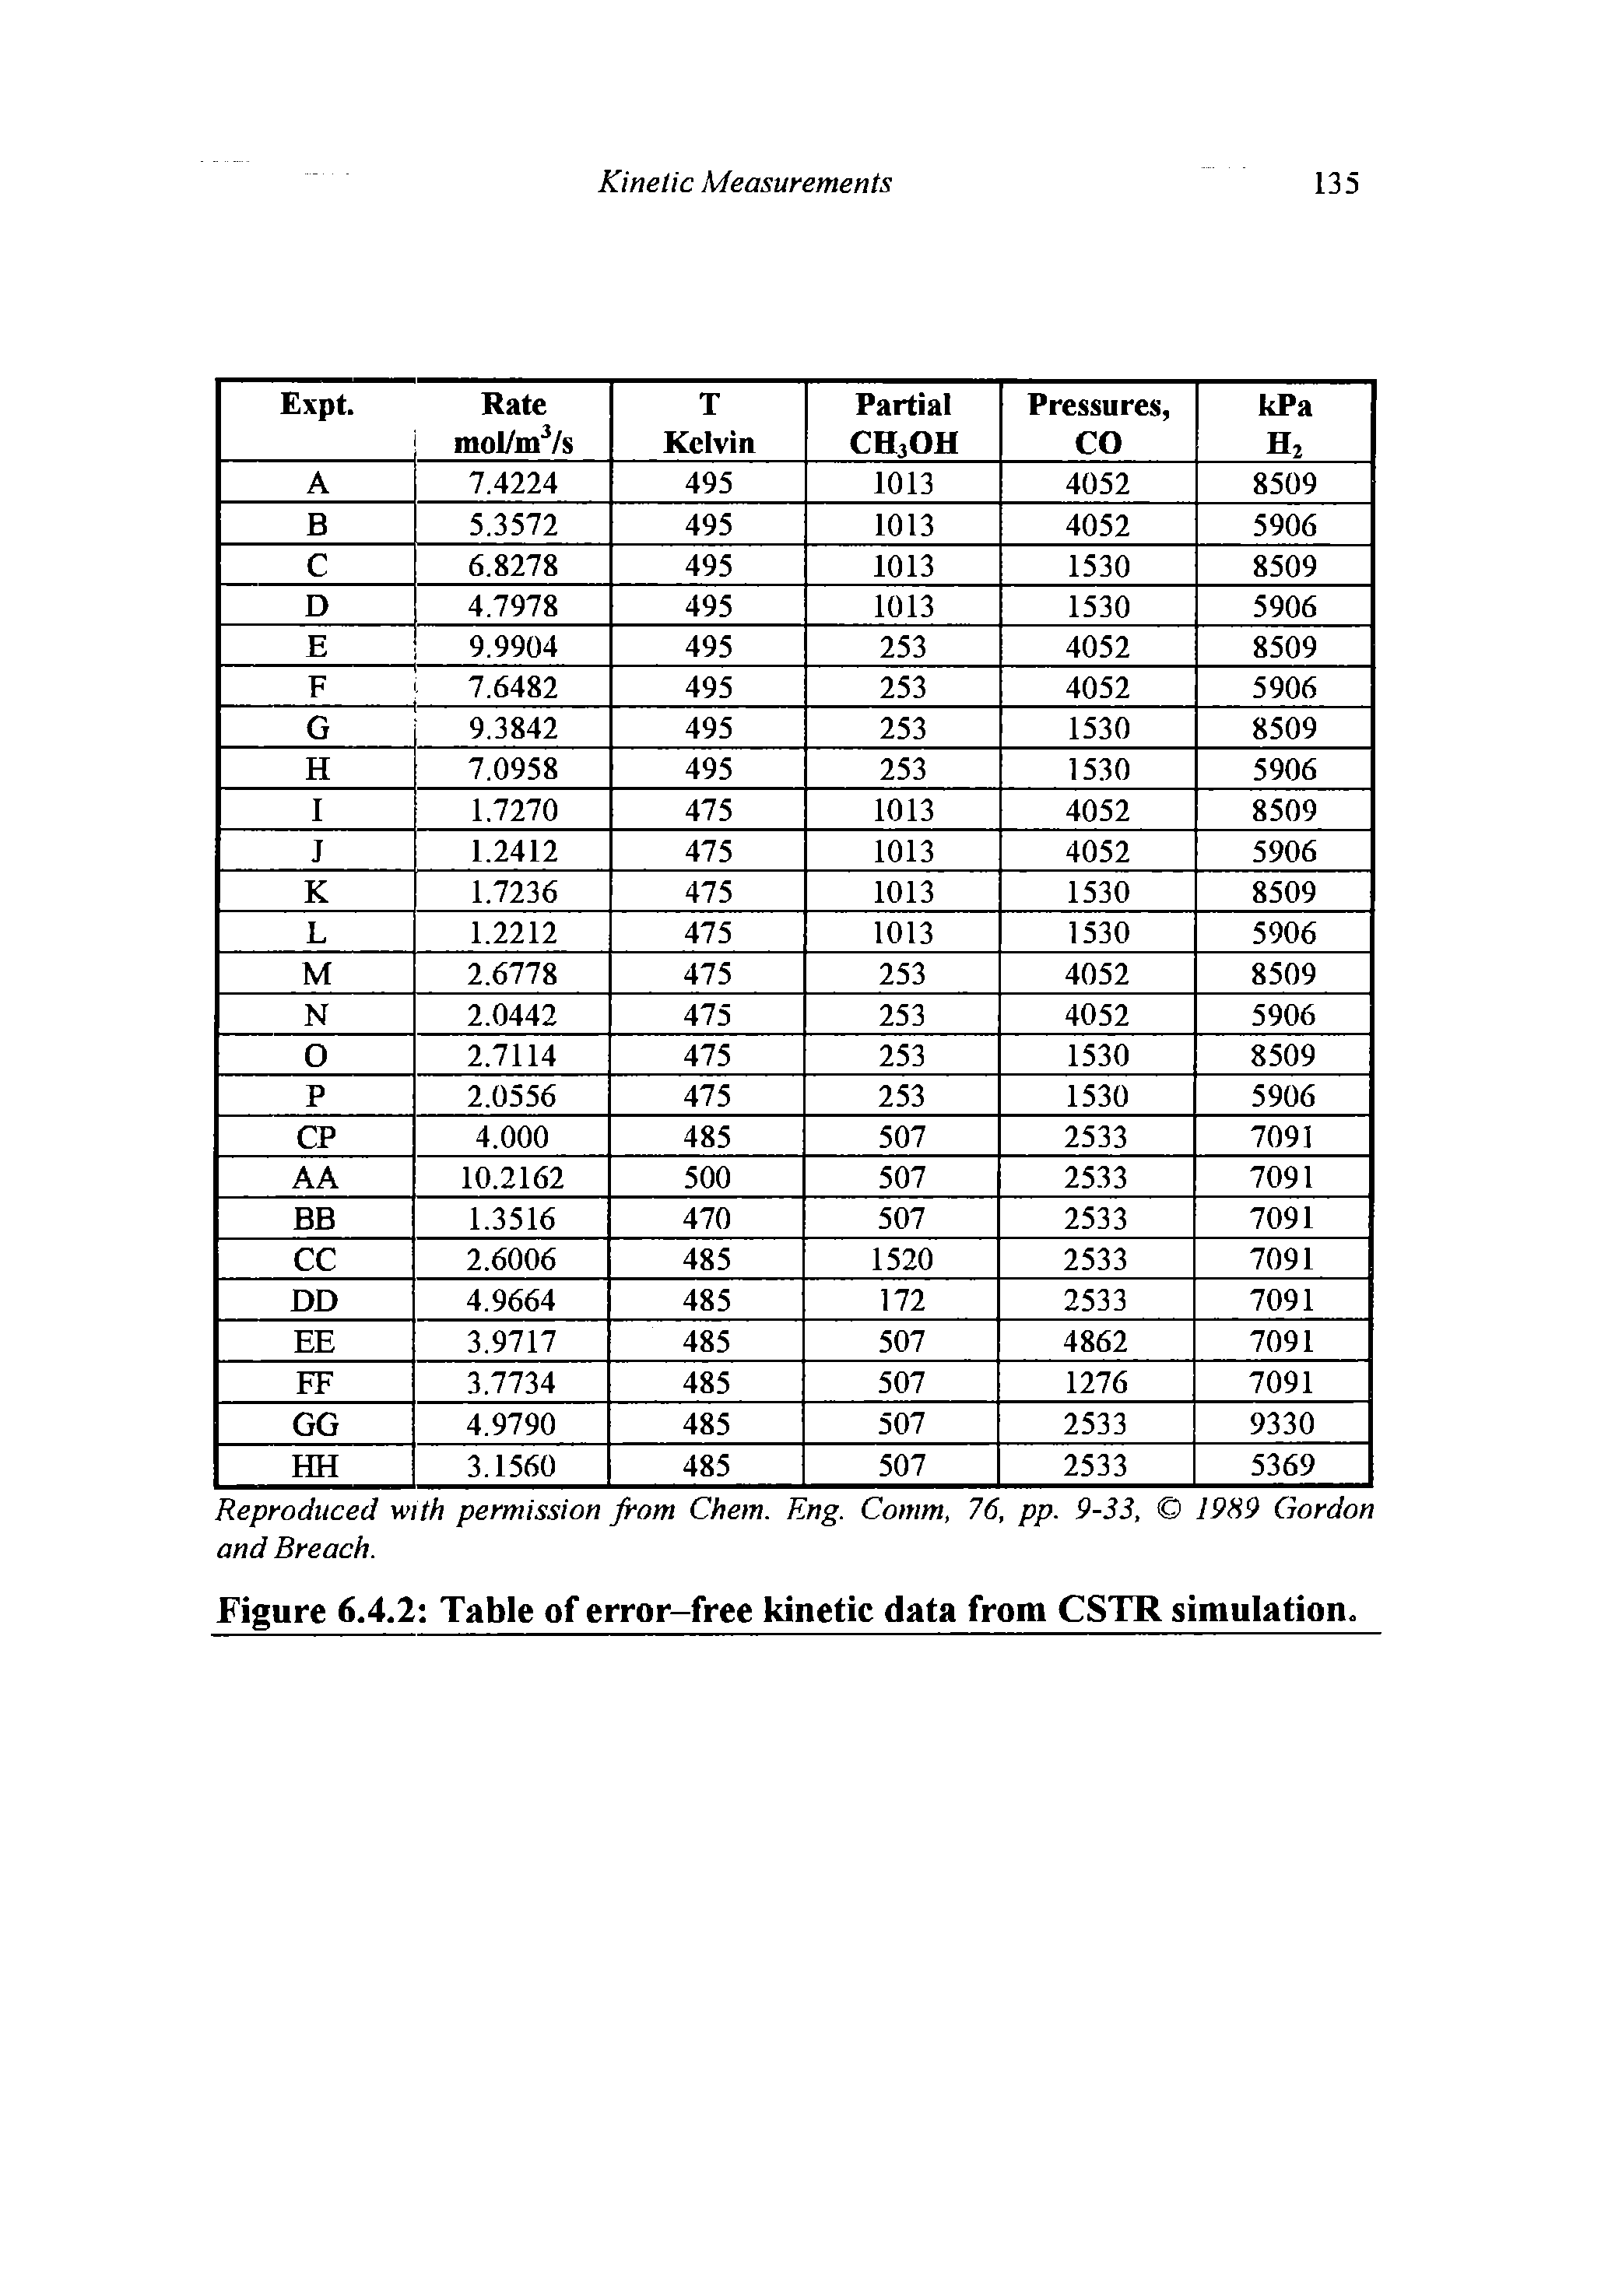 Figure 6.4.2 Table of error-free kinetic data from CSTR simulation.